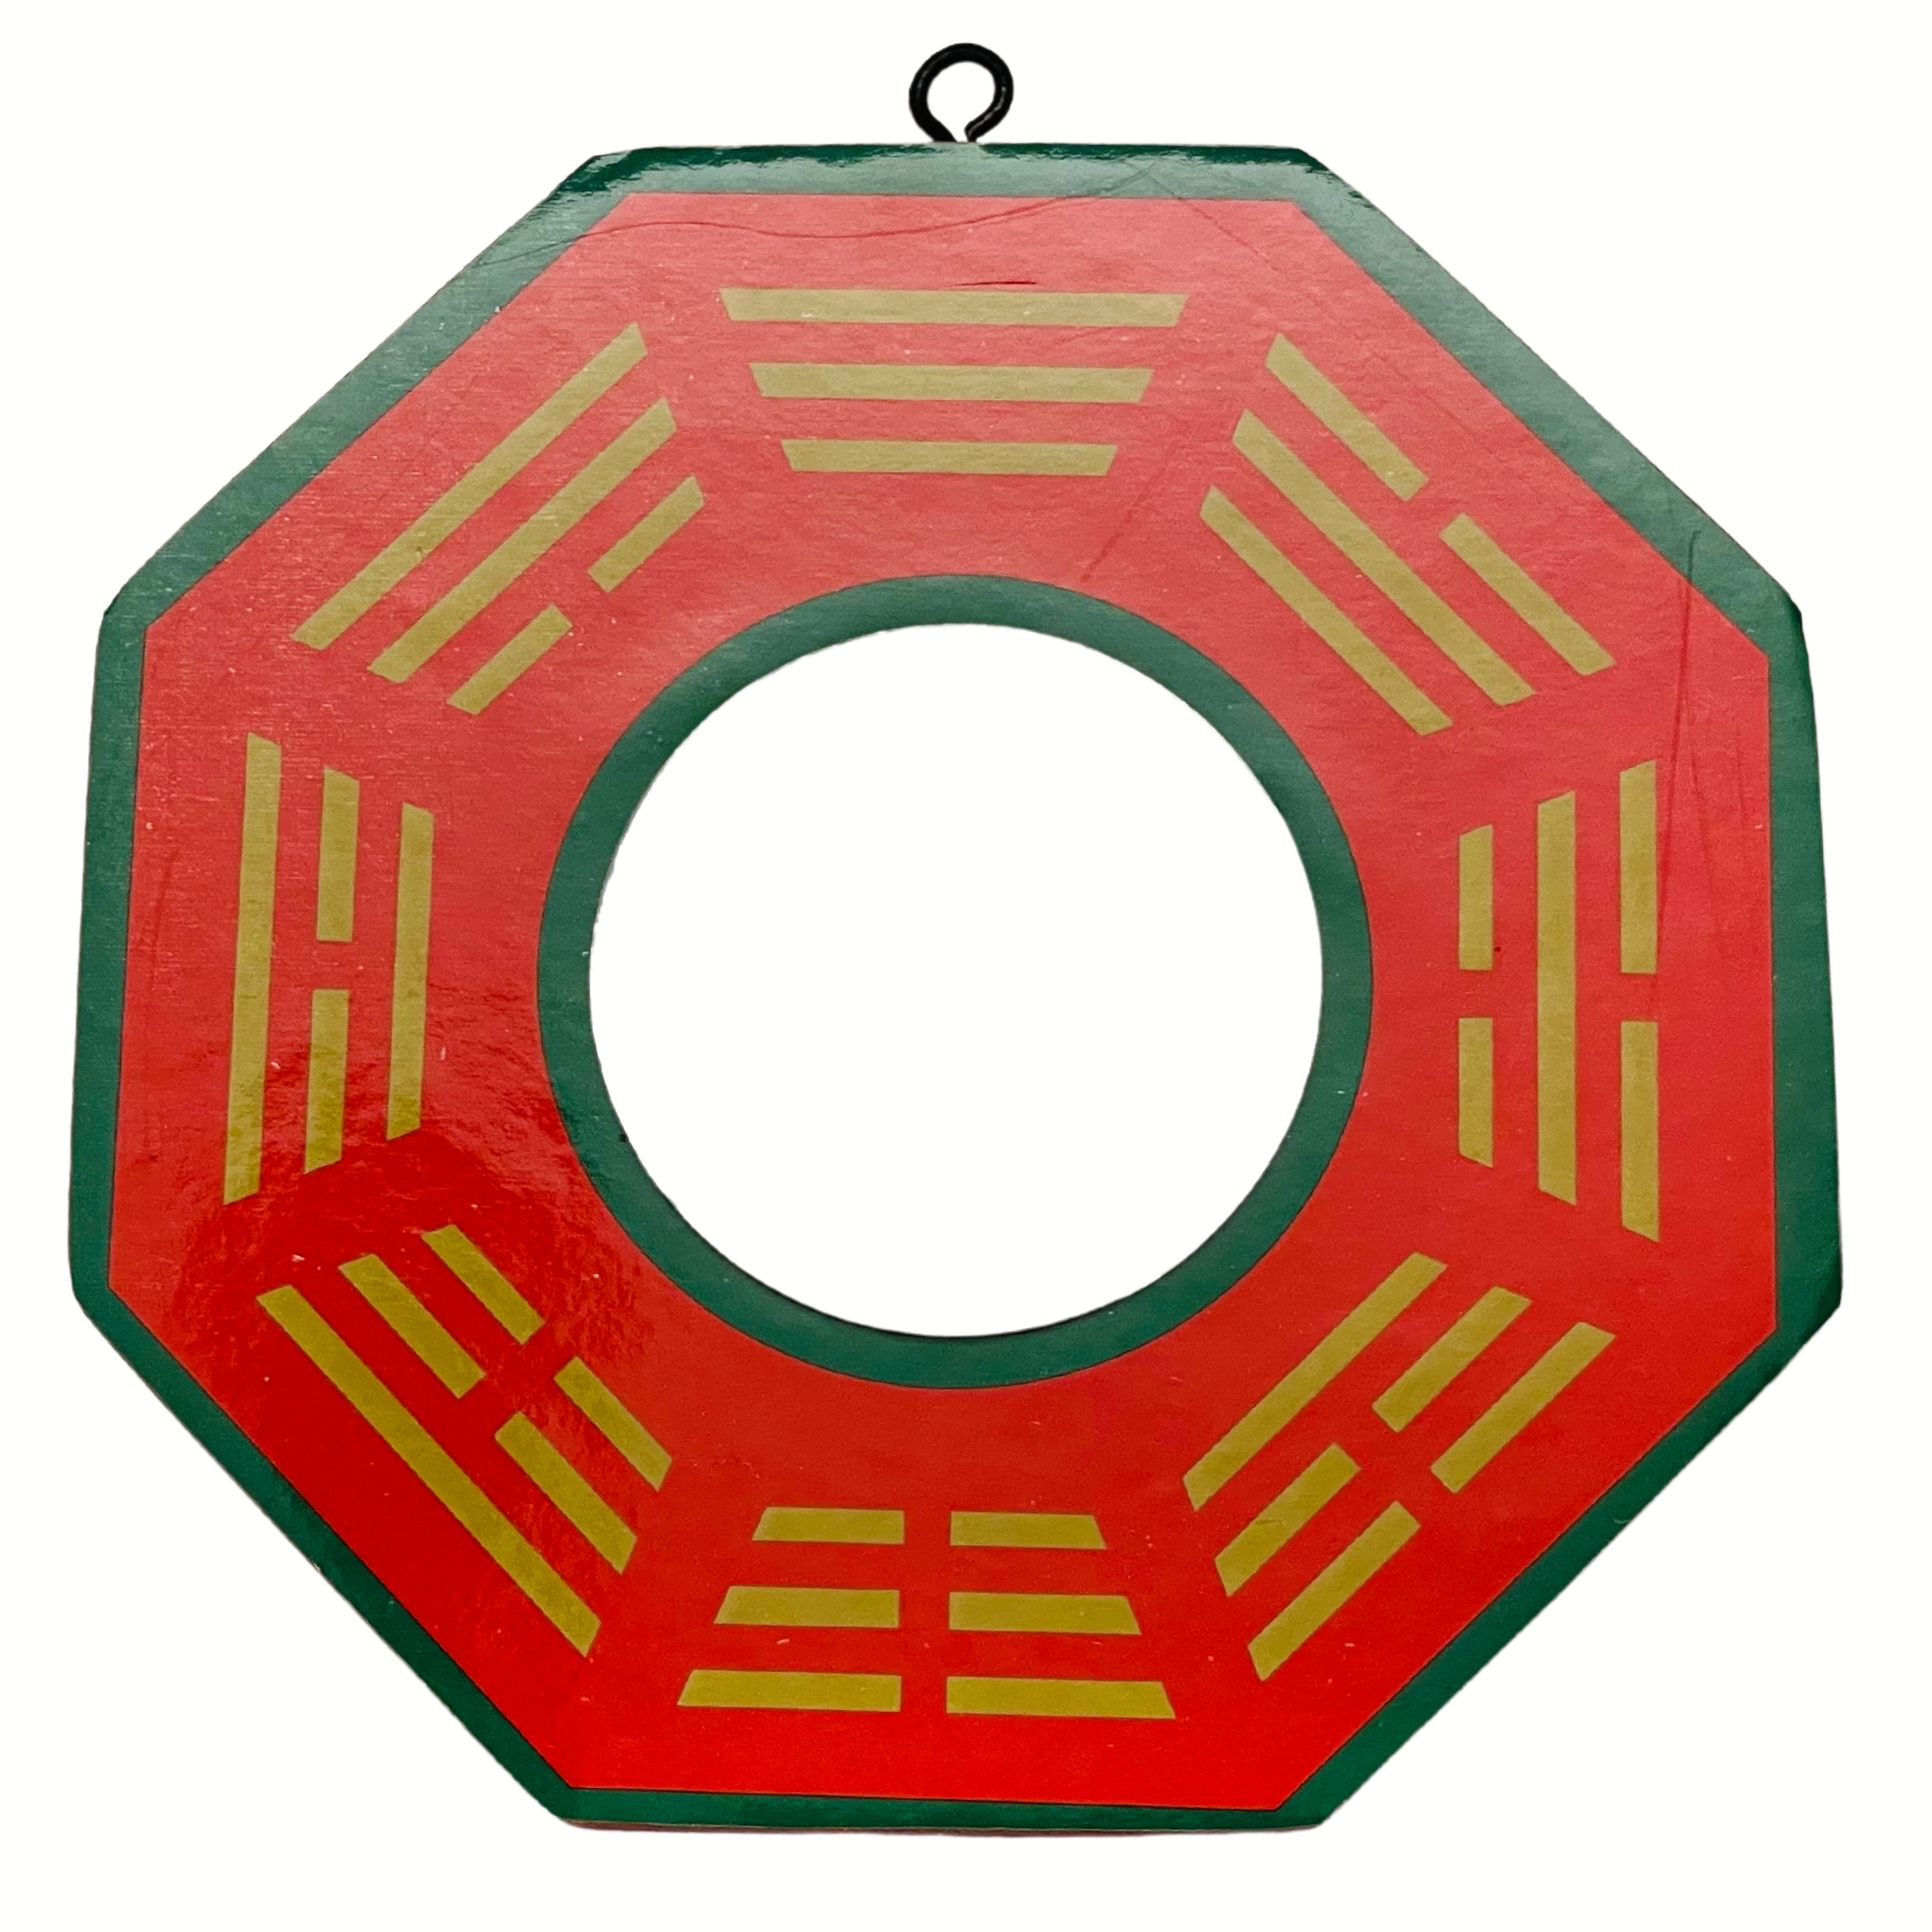 The Bagua Areas - Feng Shui - Health Manifested